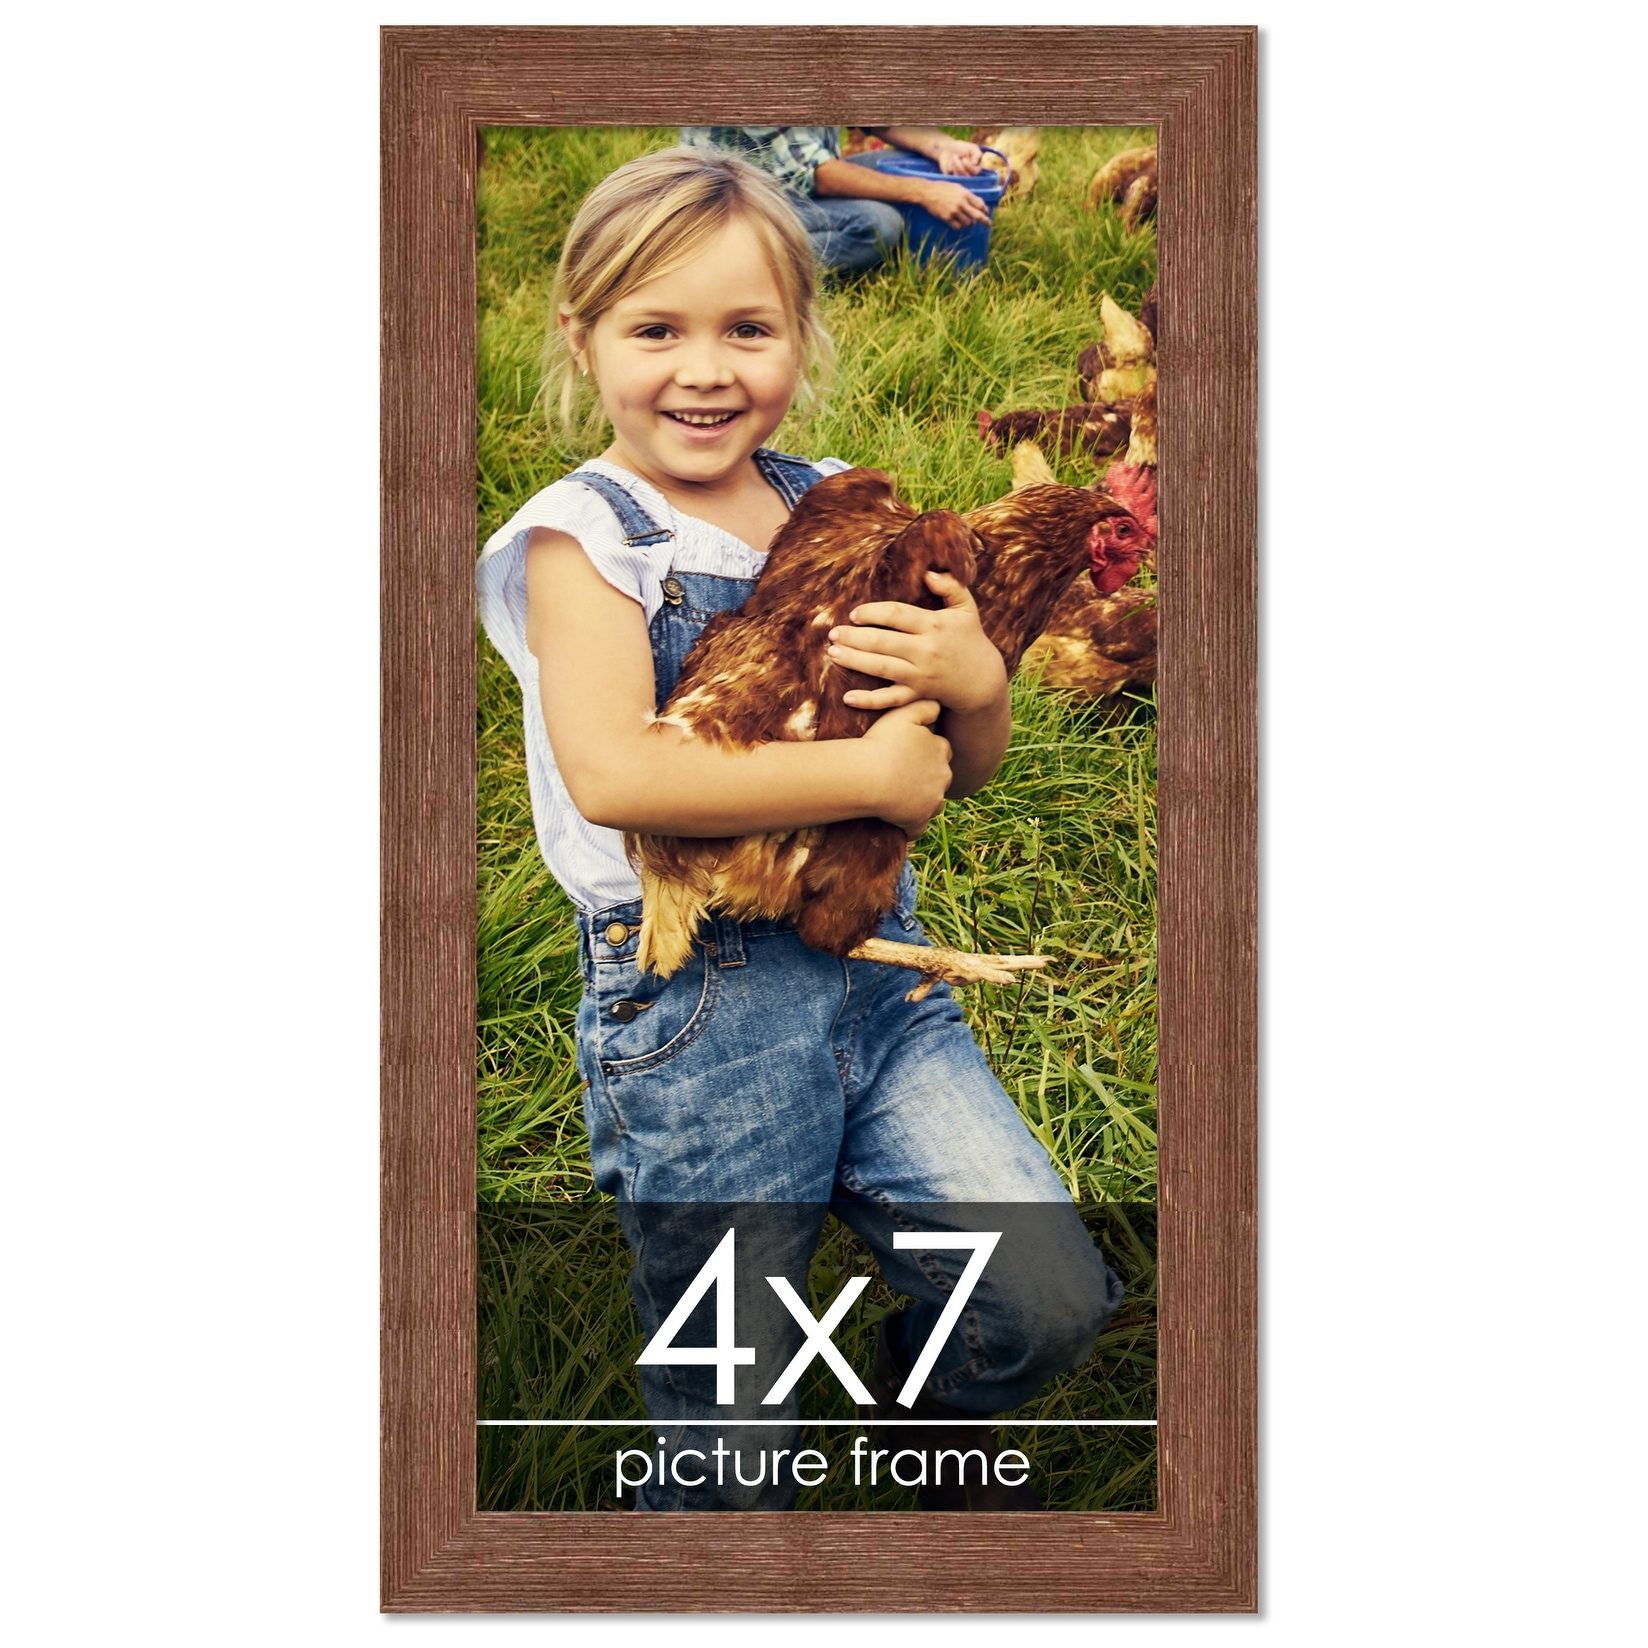 4x7 Frame White Real Wood Picture Frame Width 1.5 inches, Interior Frame  Depth